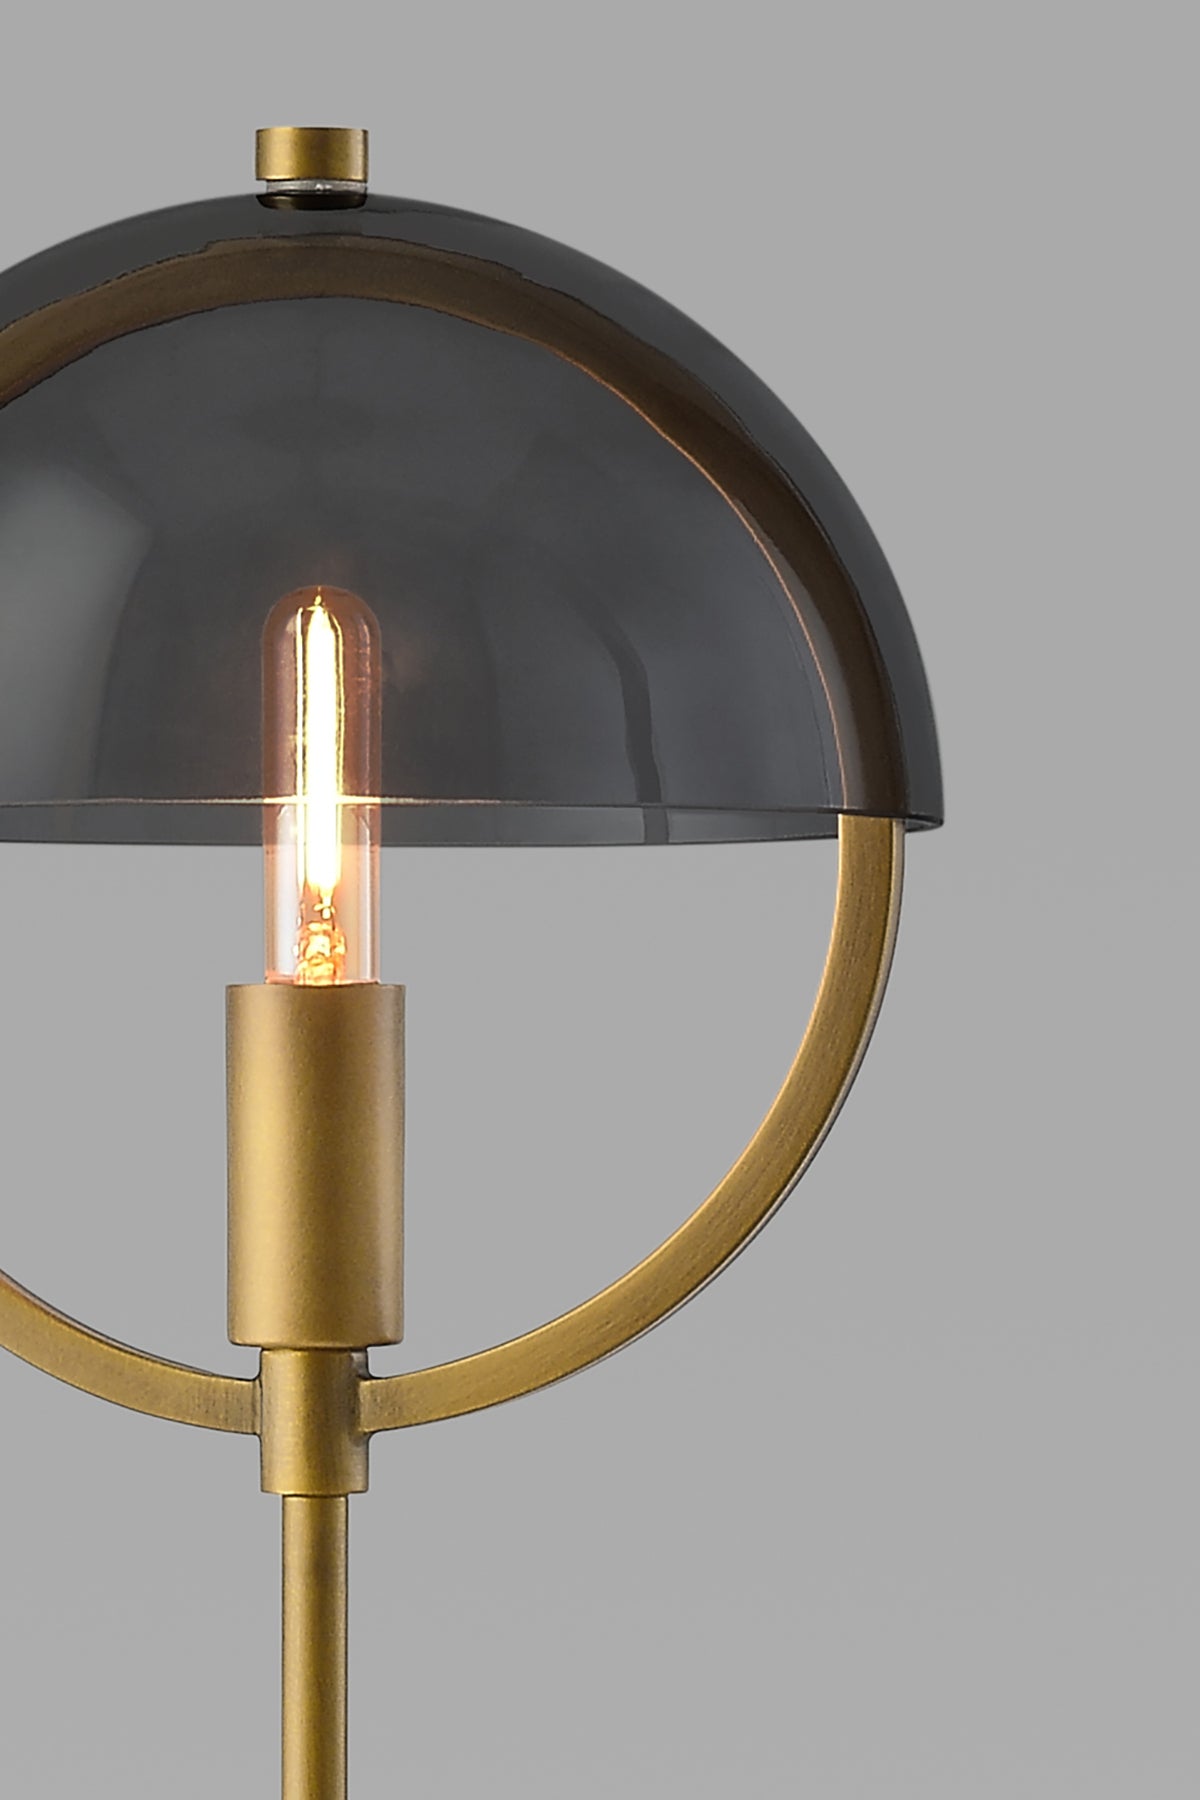 Modern table lighting with warm vintage style LED T6 light bulb